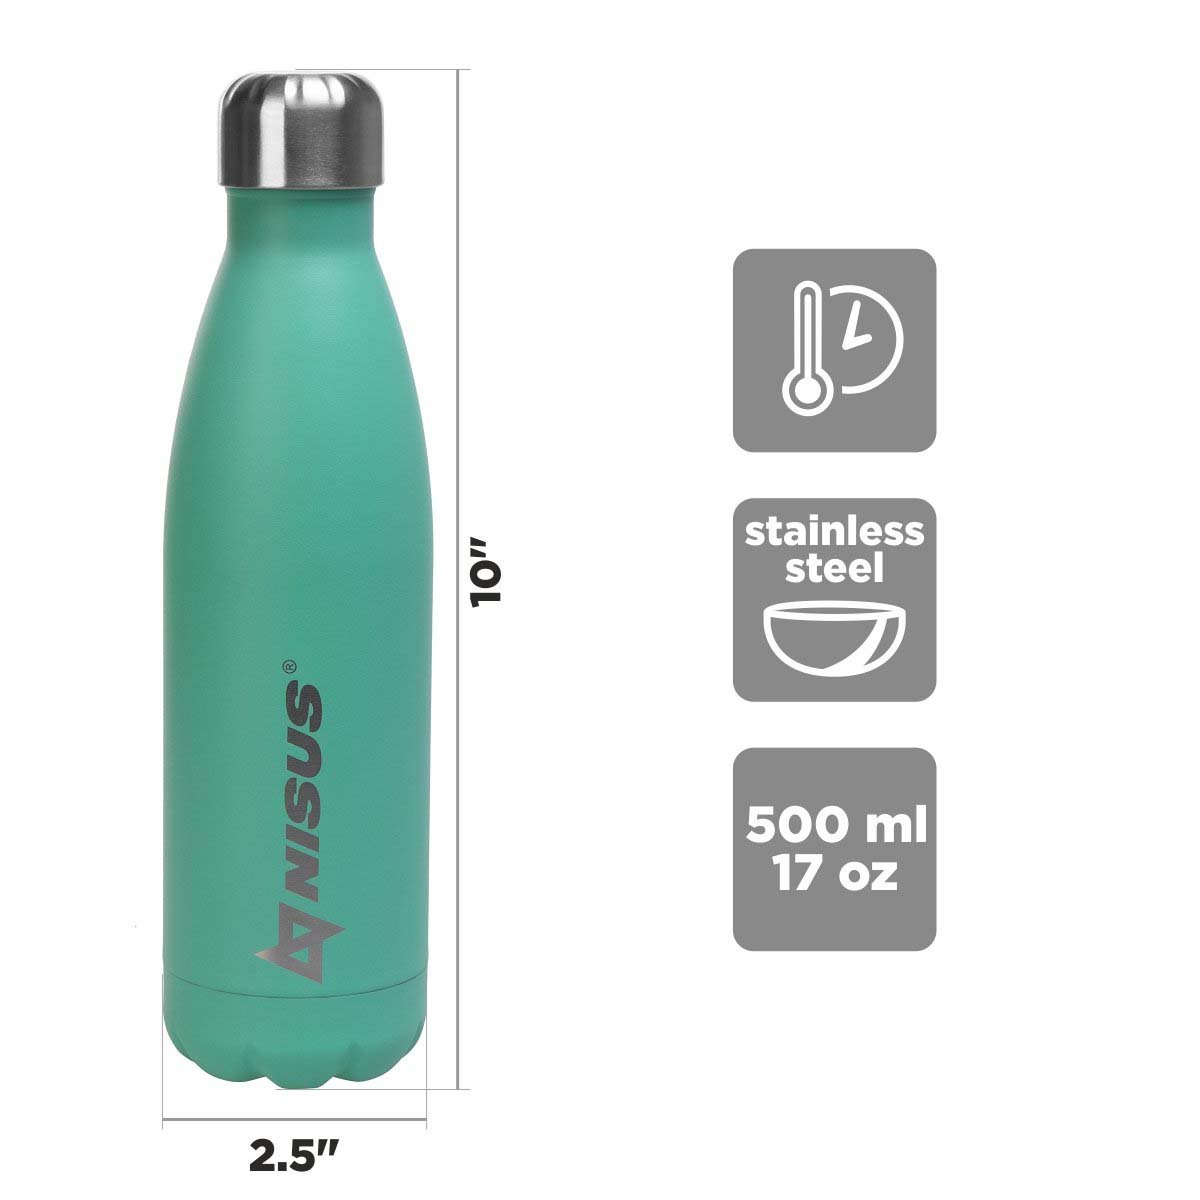 Stainless Steel Insulated Twist Top Water Bottle, 17 oz is 10 inches high and 2.5 inched wide